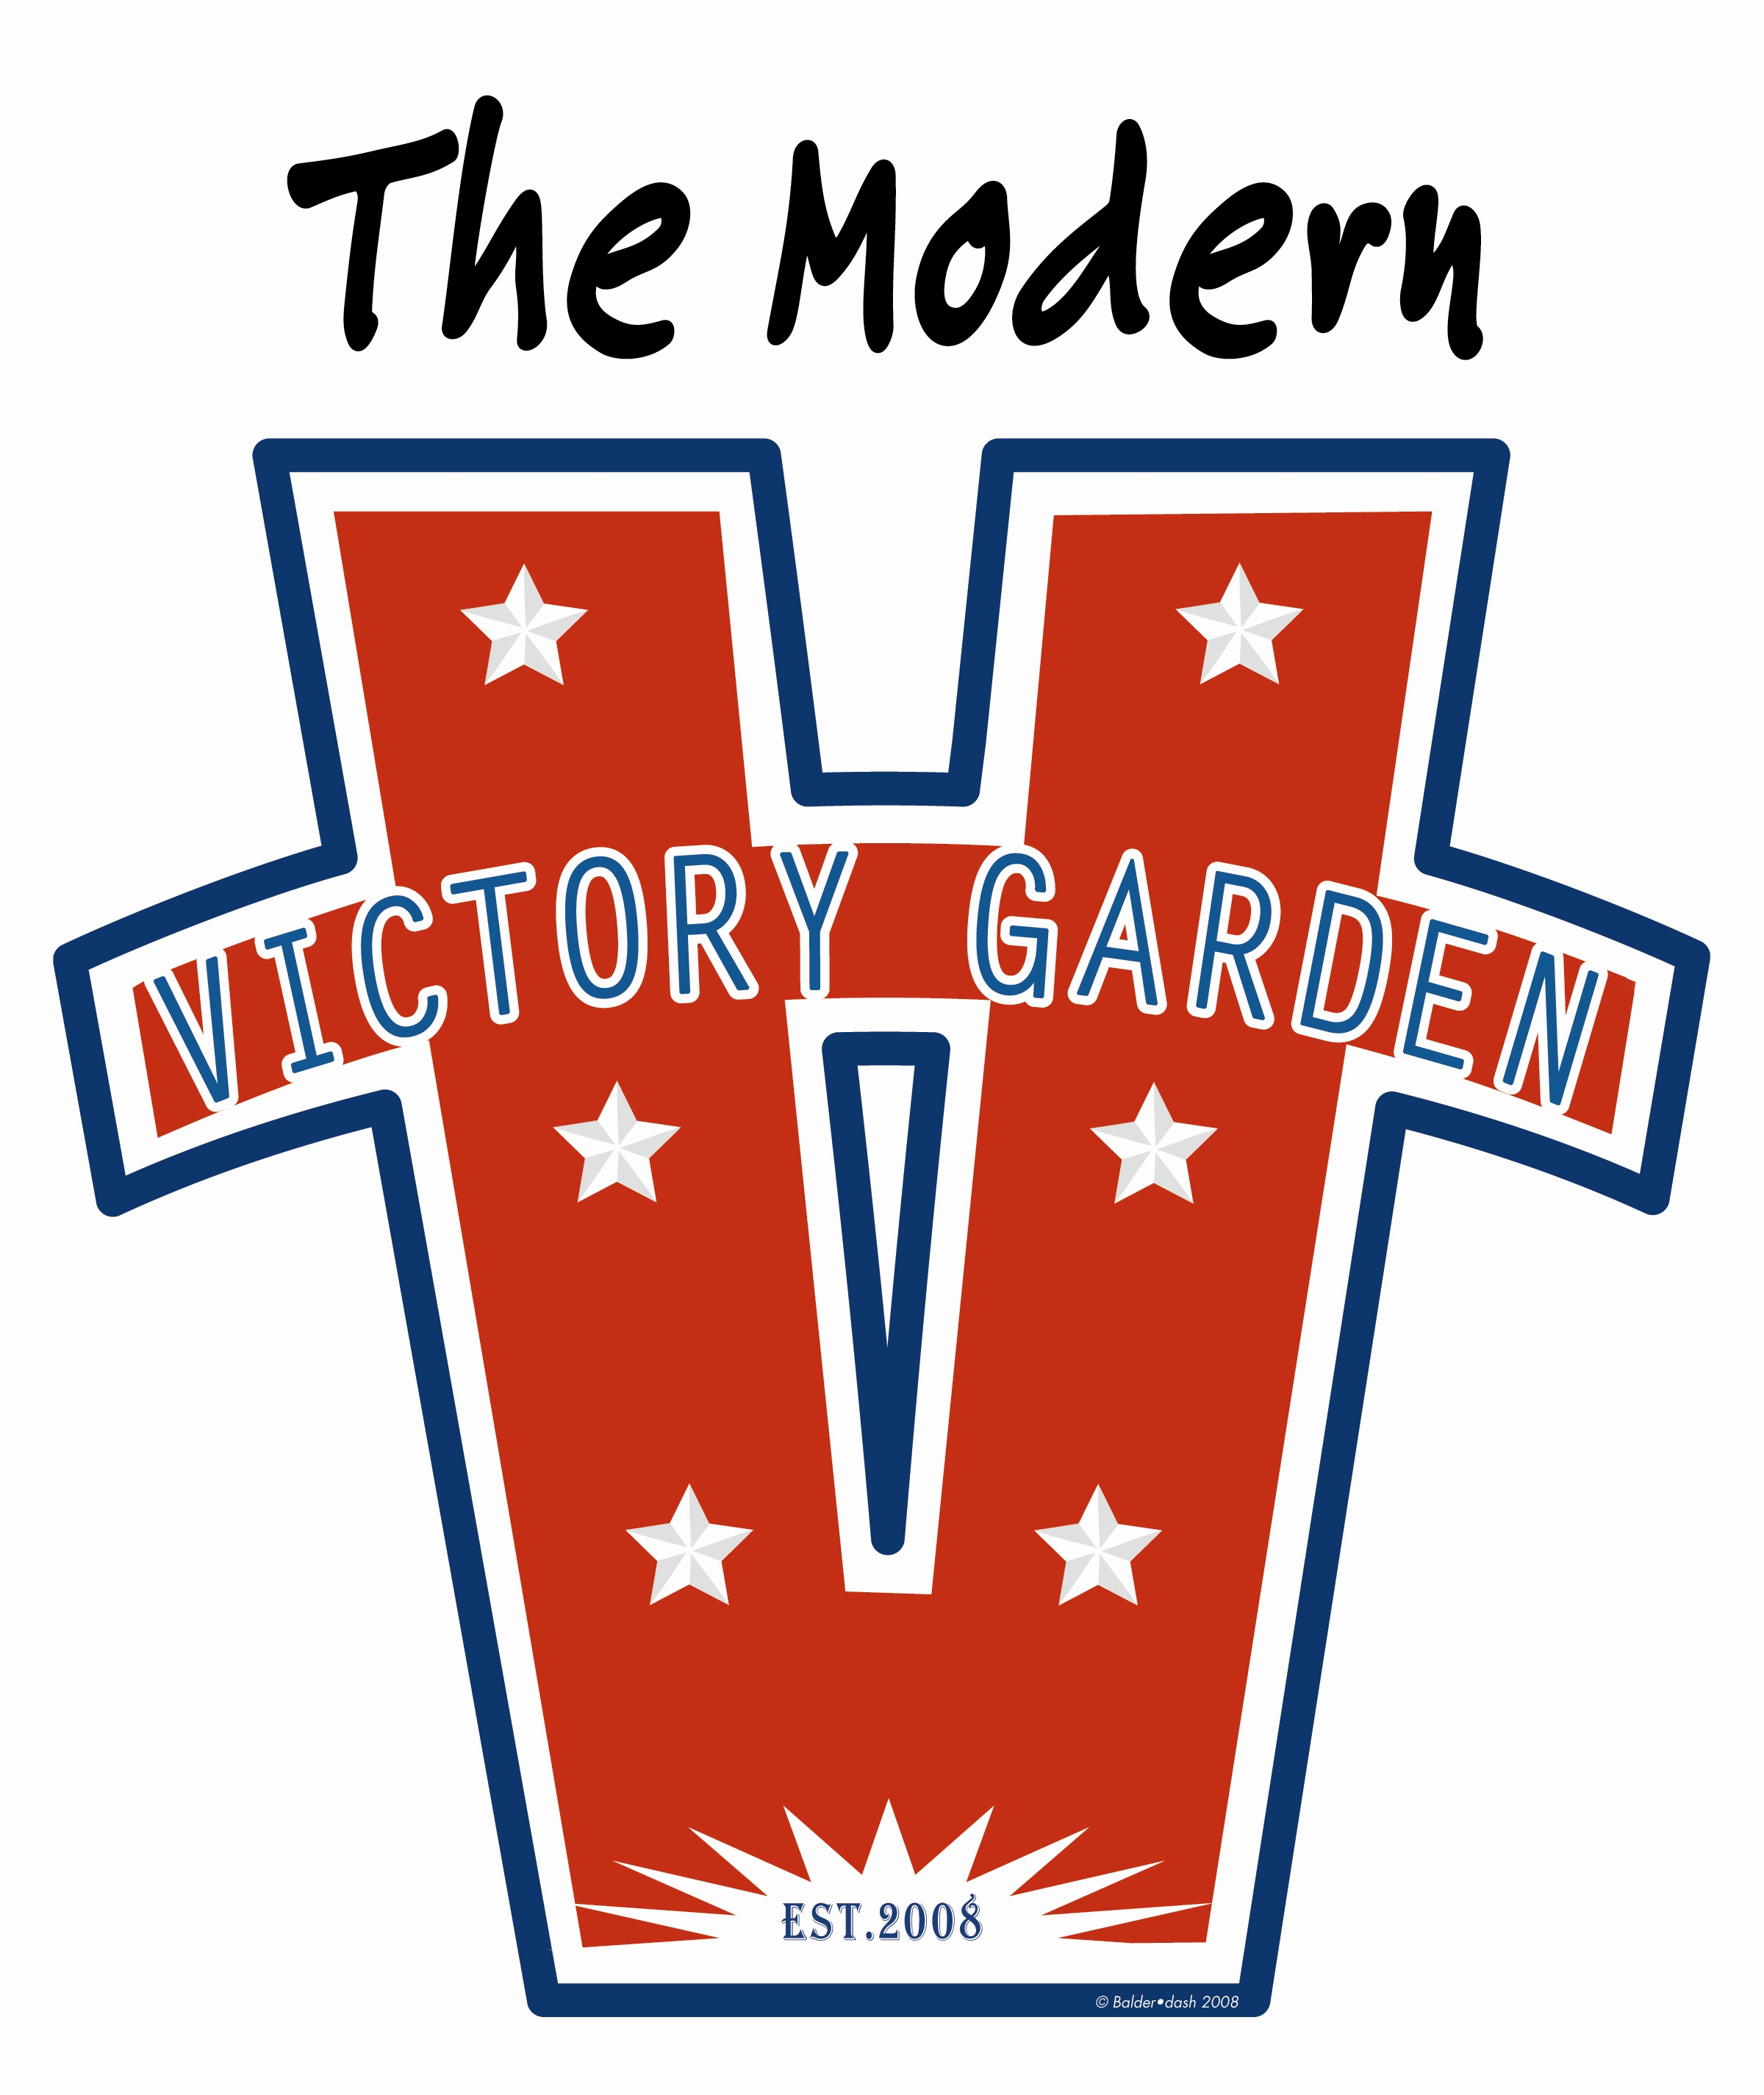 The Victory Garden Then And Now